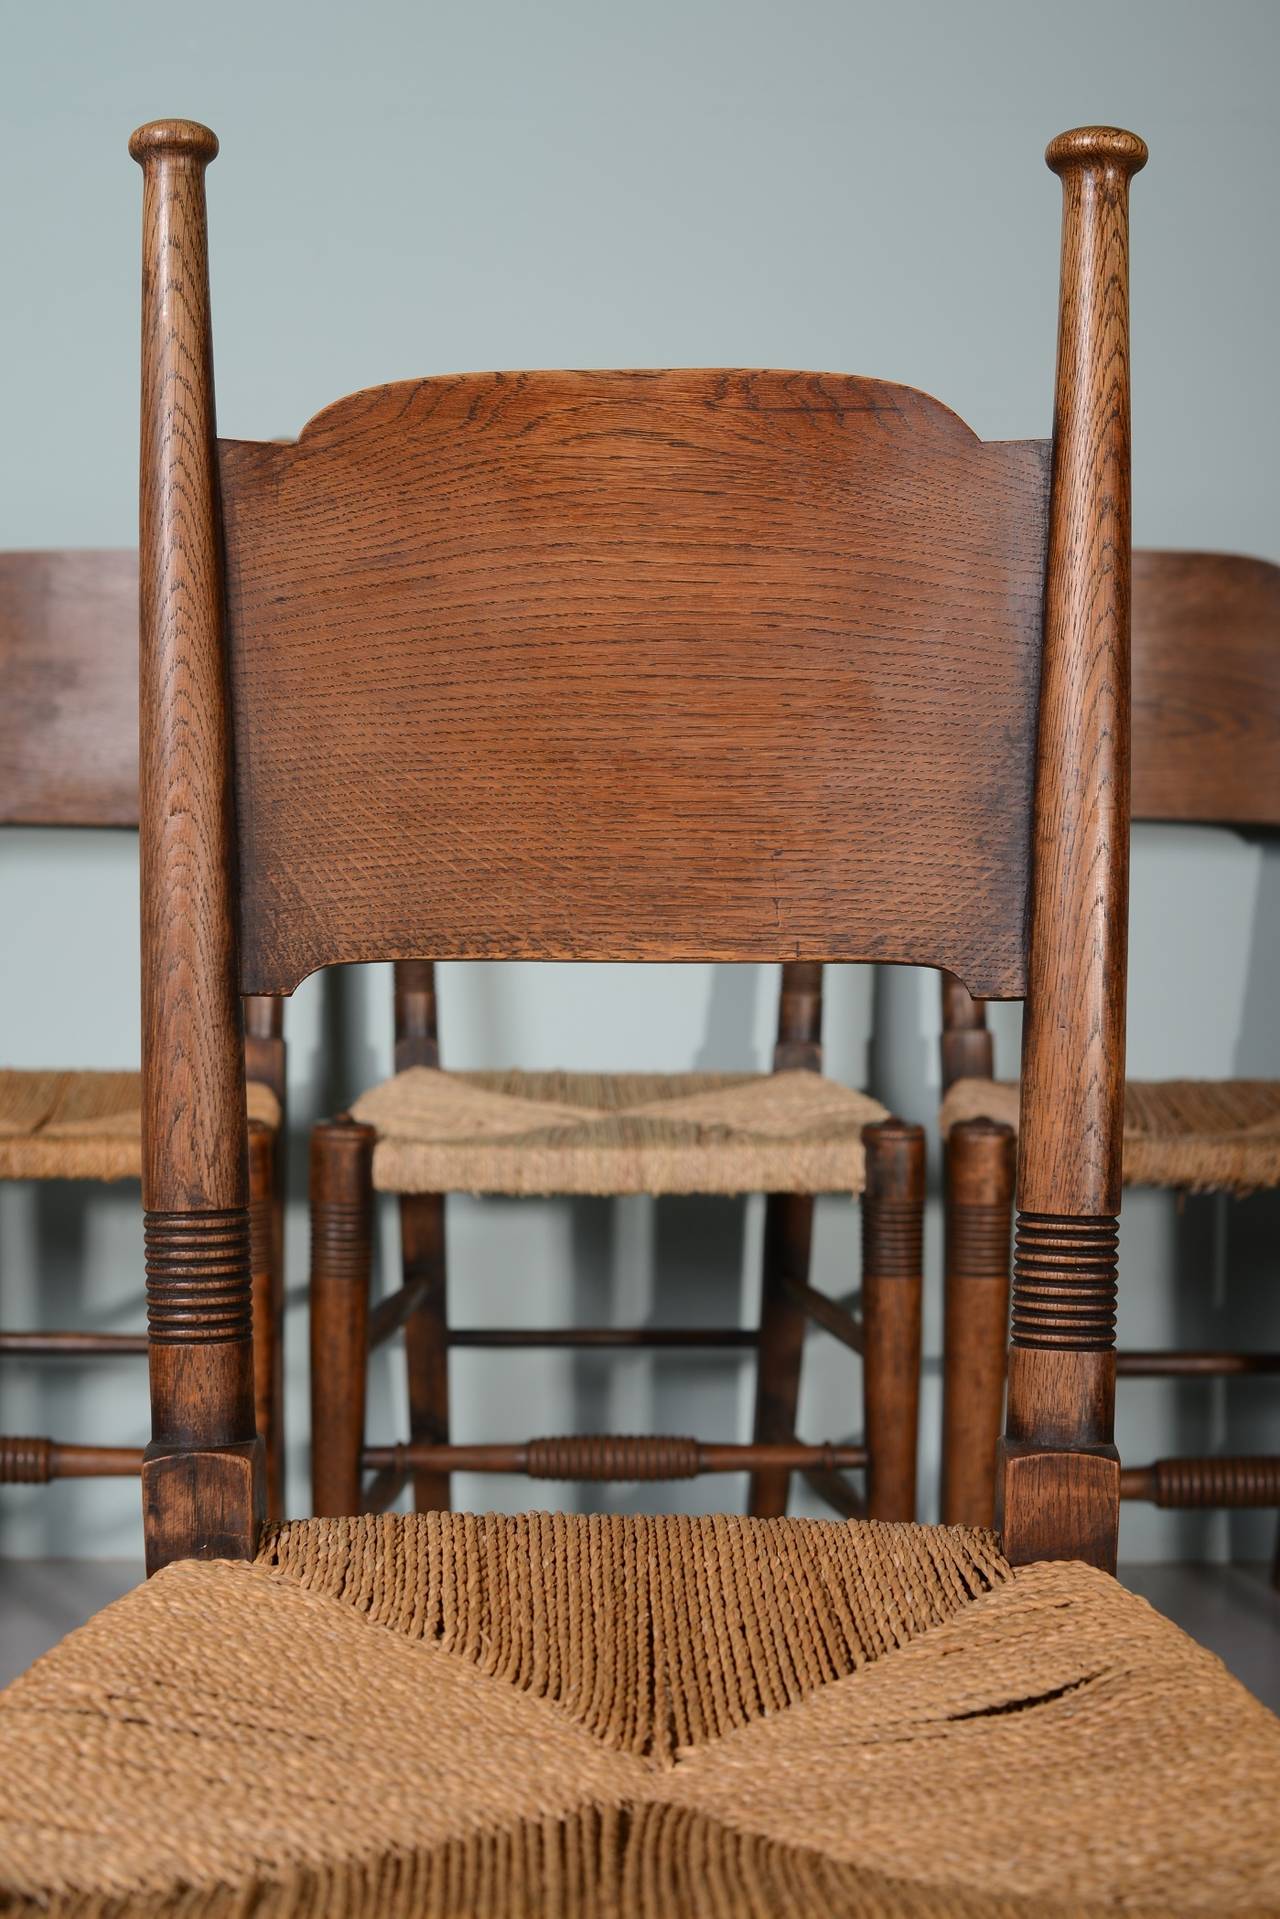 Set of Six Antique Dining Chairs by William Birch
A superb quality set of six, antique oak dining chairs by William Birch of High Wycombe around 1890.
An iconic design, these Arts & Crafts antique oak dining chairs are in fabulous condition.
The